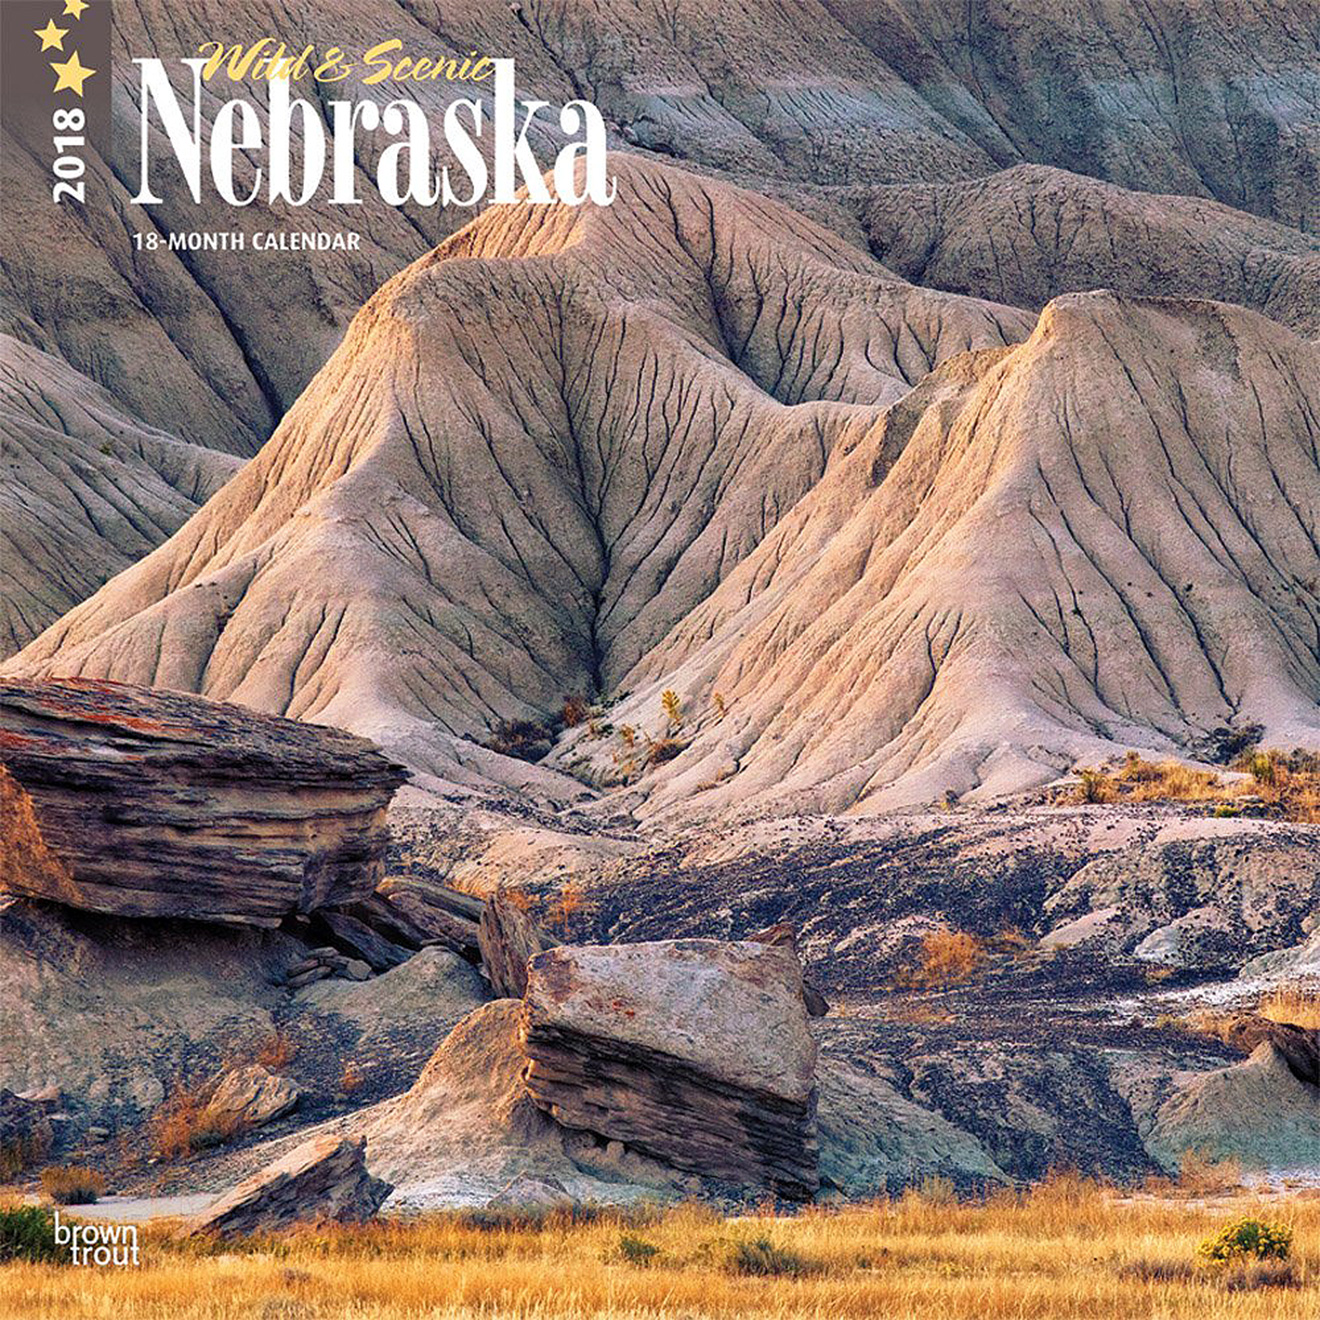 2018 Nebraska Calendar by Brown Trout.  Sold in Amazon, Retail Stores, and Calendar Club.  Contributed 6 Photographs Including Cover. -  Picture